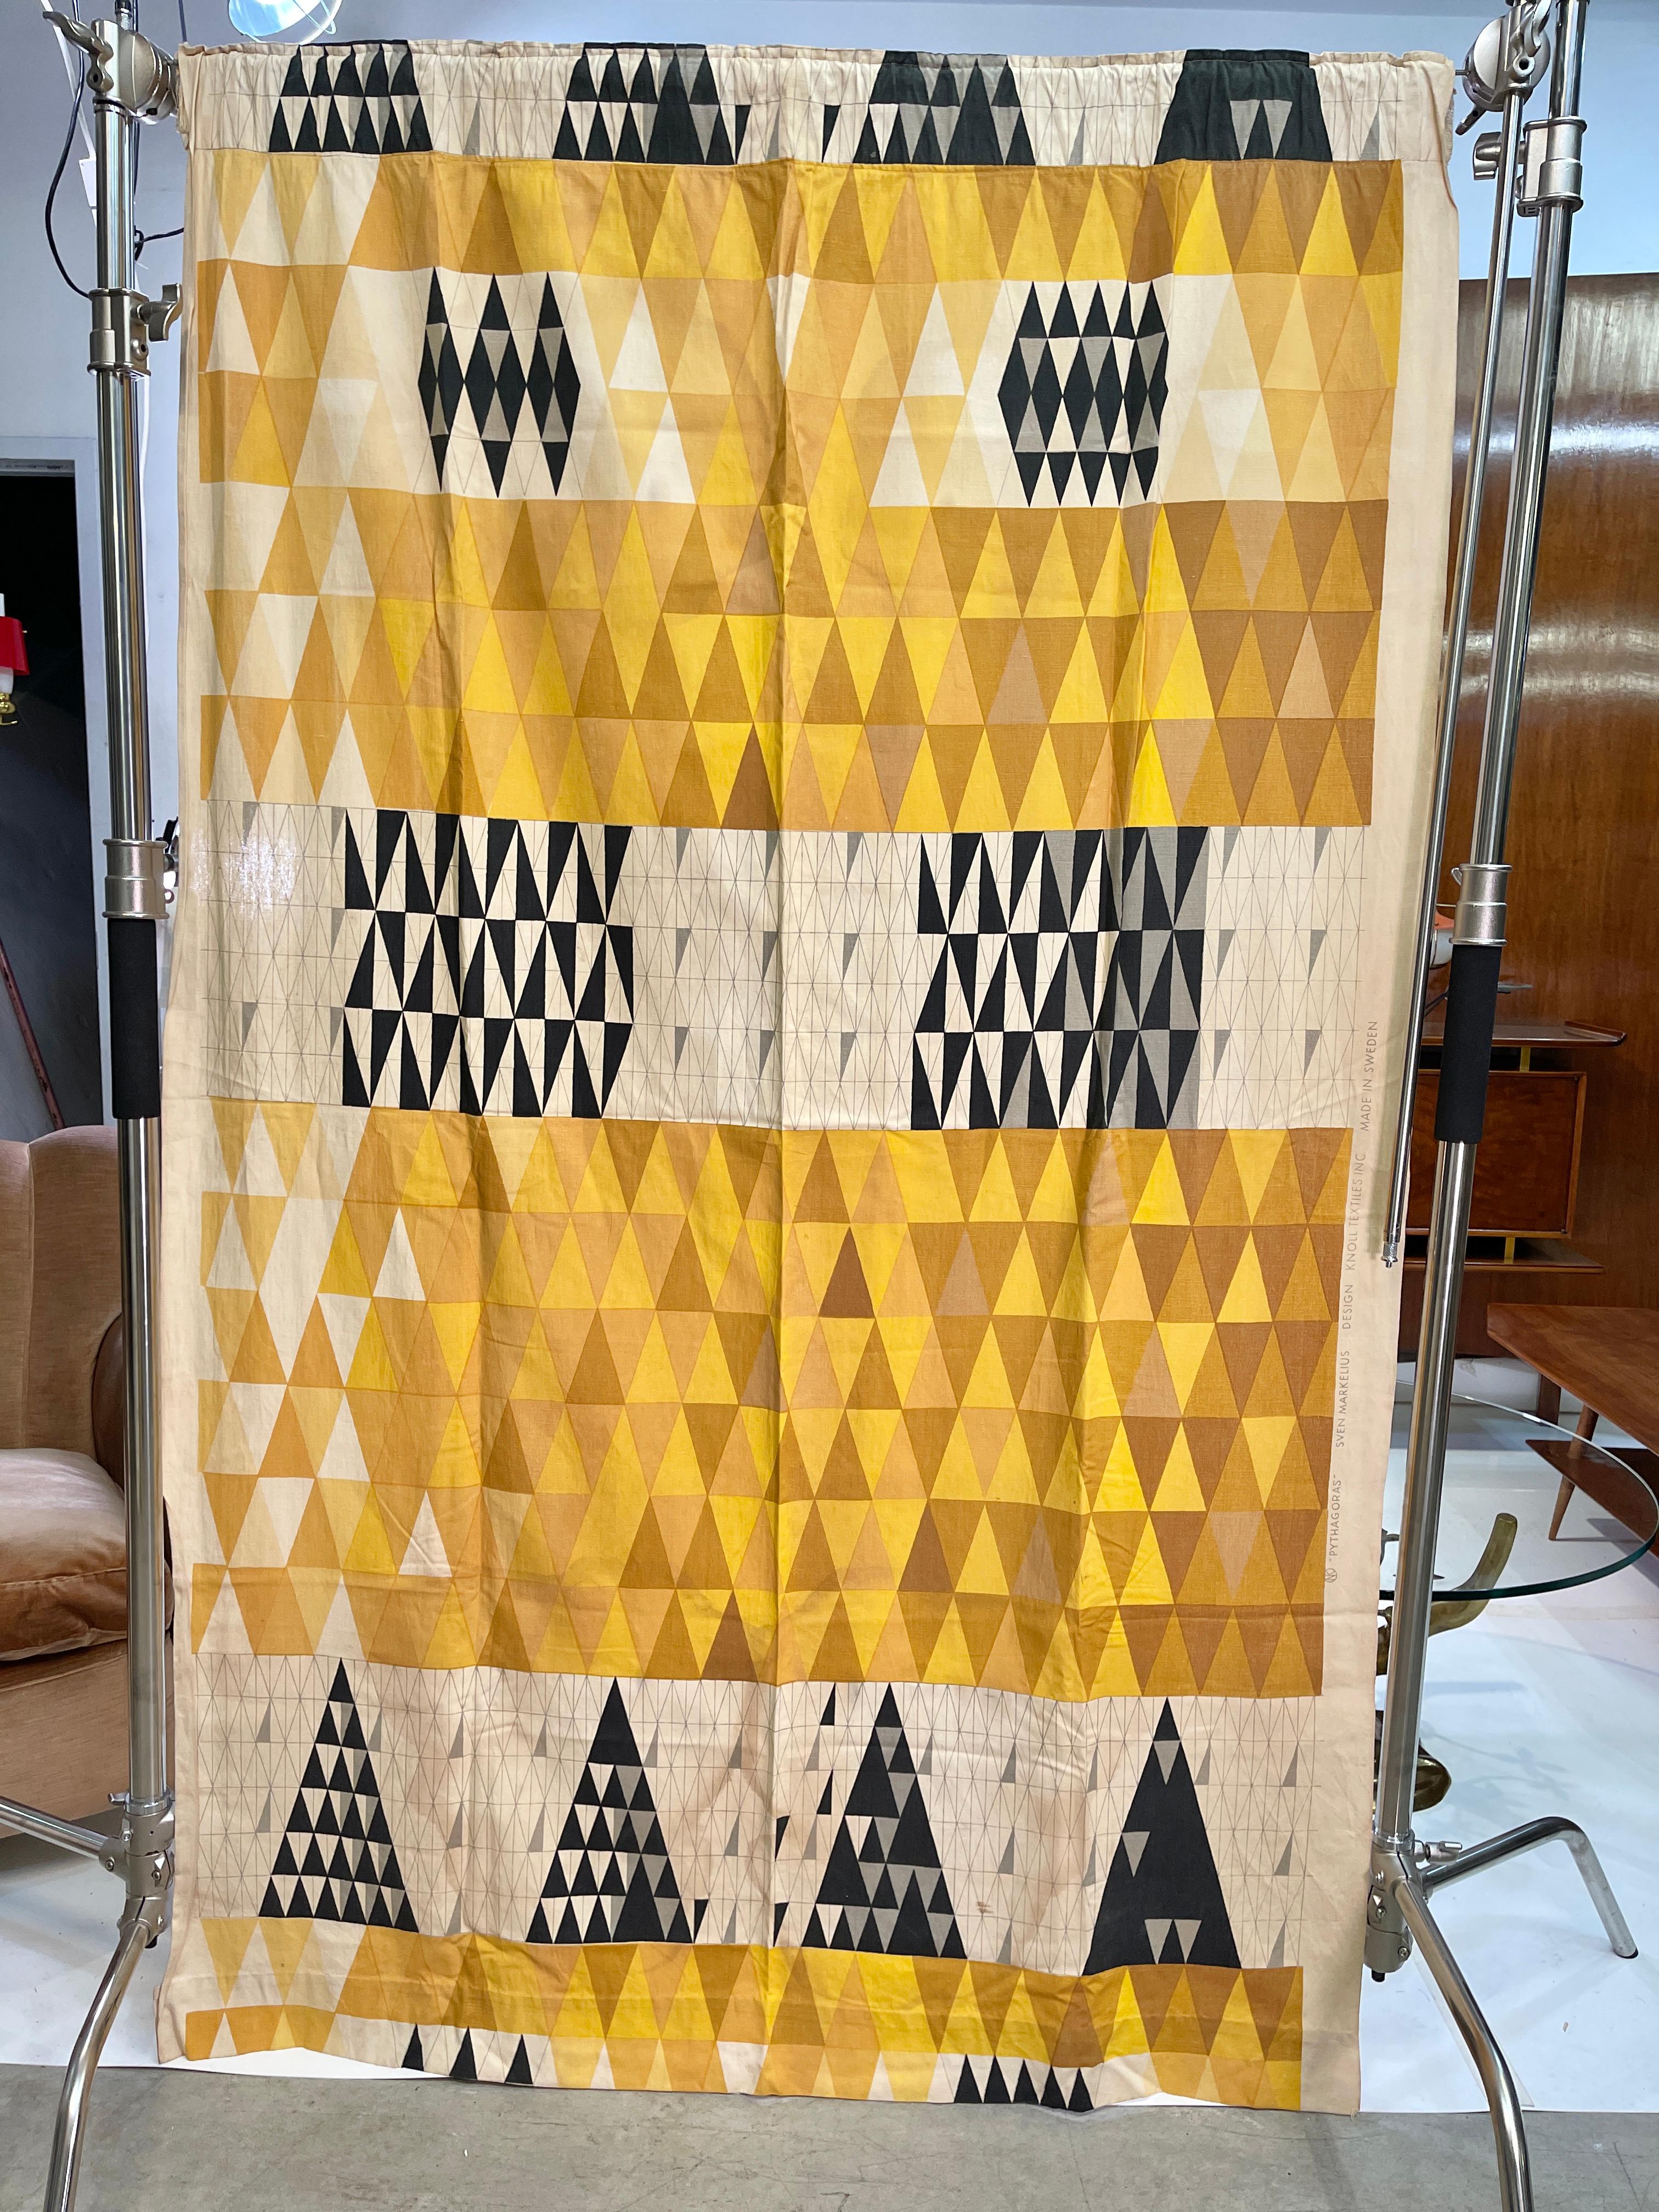 Sven Markelius (1889-1970), Pythagoras drapery panel produced in 1952 by Ljungberg's Textile AB, Sweden for Knoll Associates, New York, NY.
Overall dimensions are 77 inches high by 50 inches wide including printed selvedge. 
Along the top is a